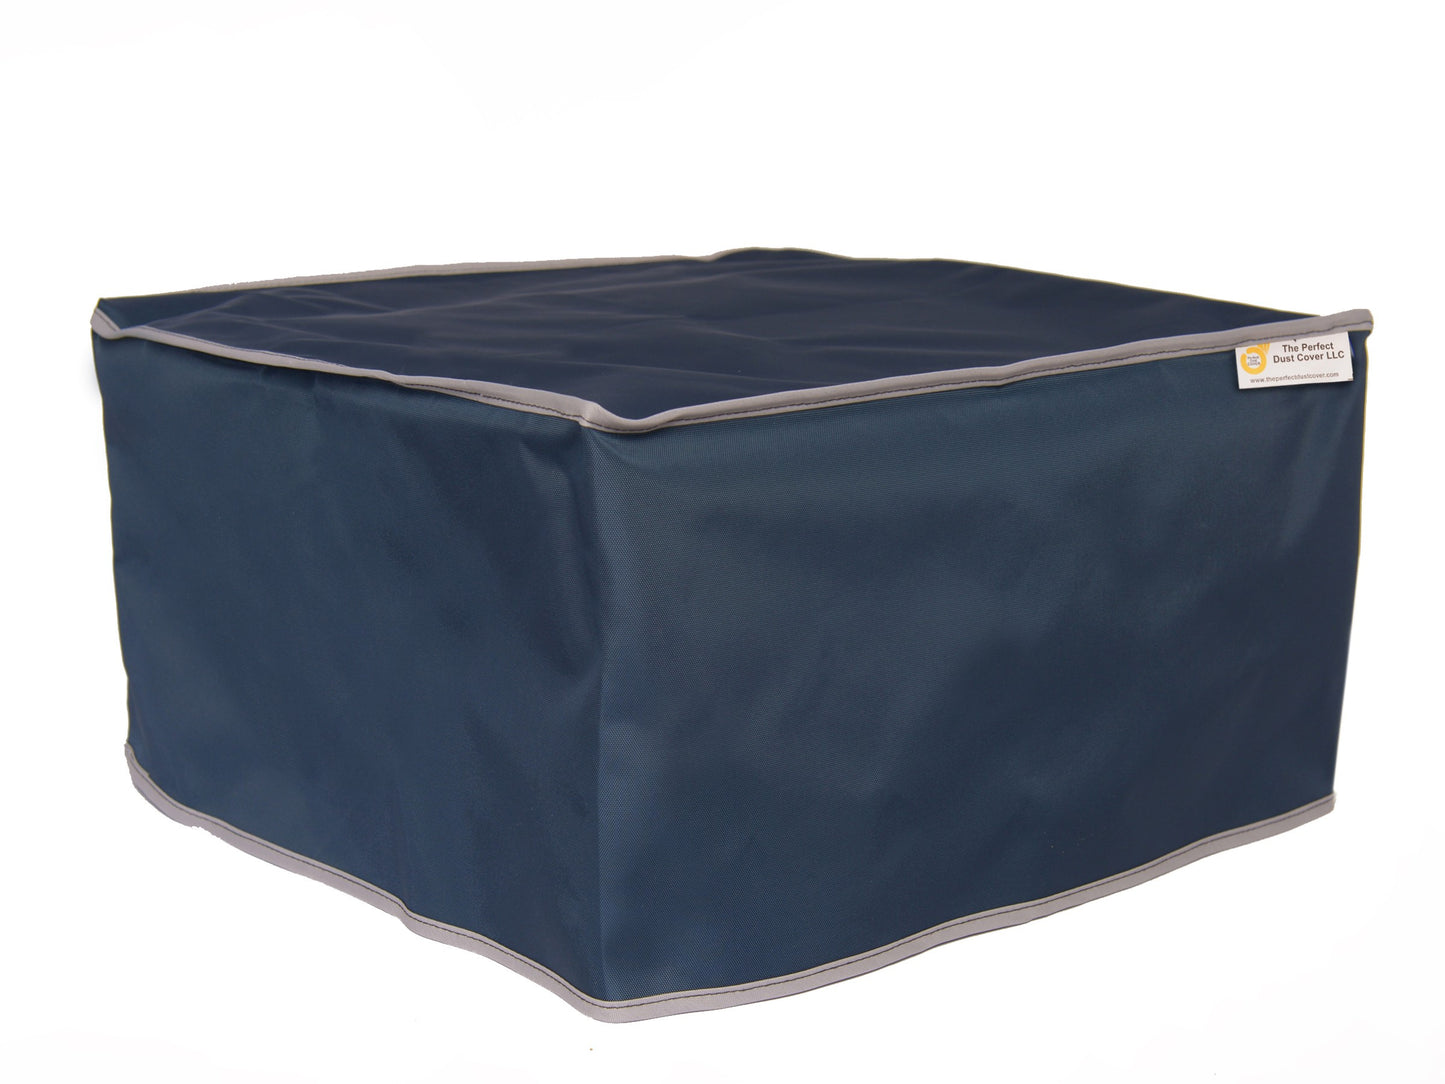 The Perfect Dust Cover, Navy Blue Nylon Cover Compatible with Canon PIXMA TS3720 Wireless Inkjet Printer, Anti Static, Double Stitched and Waterproof Dust Cover Dimensions 17.2''W x 12.9''D x 5.8''H by Perfect Dust Cover LLC